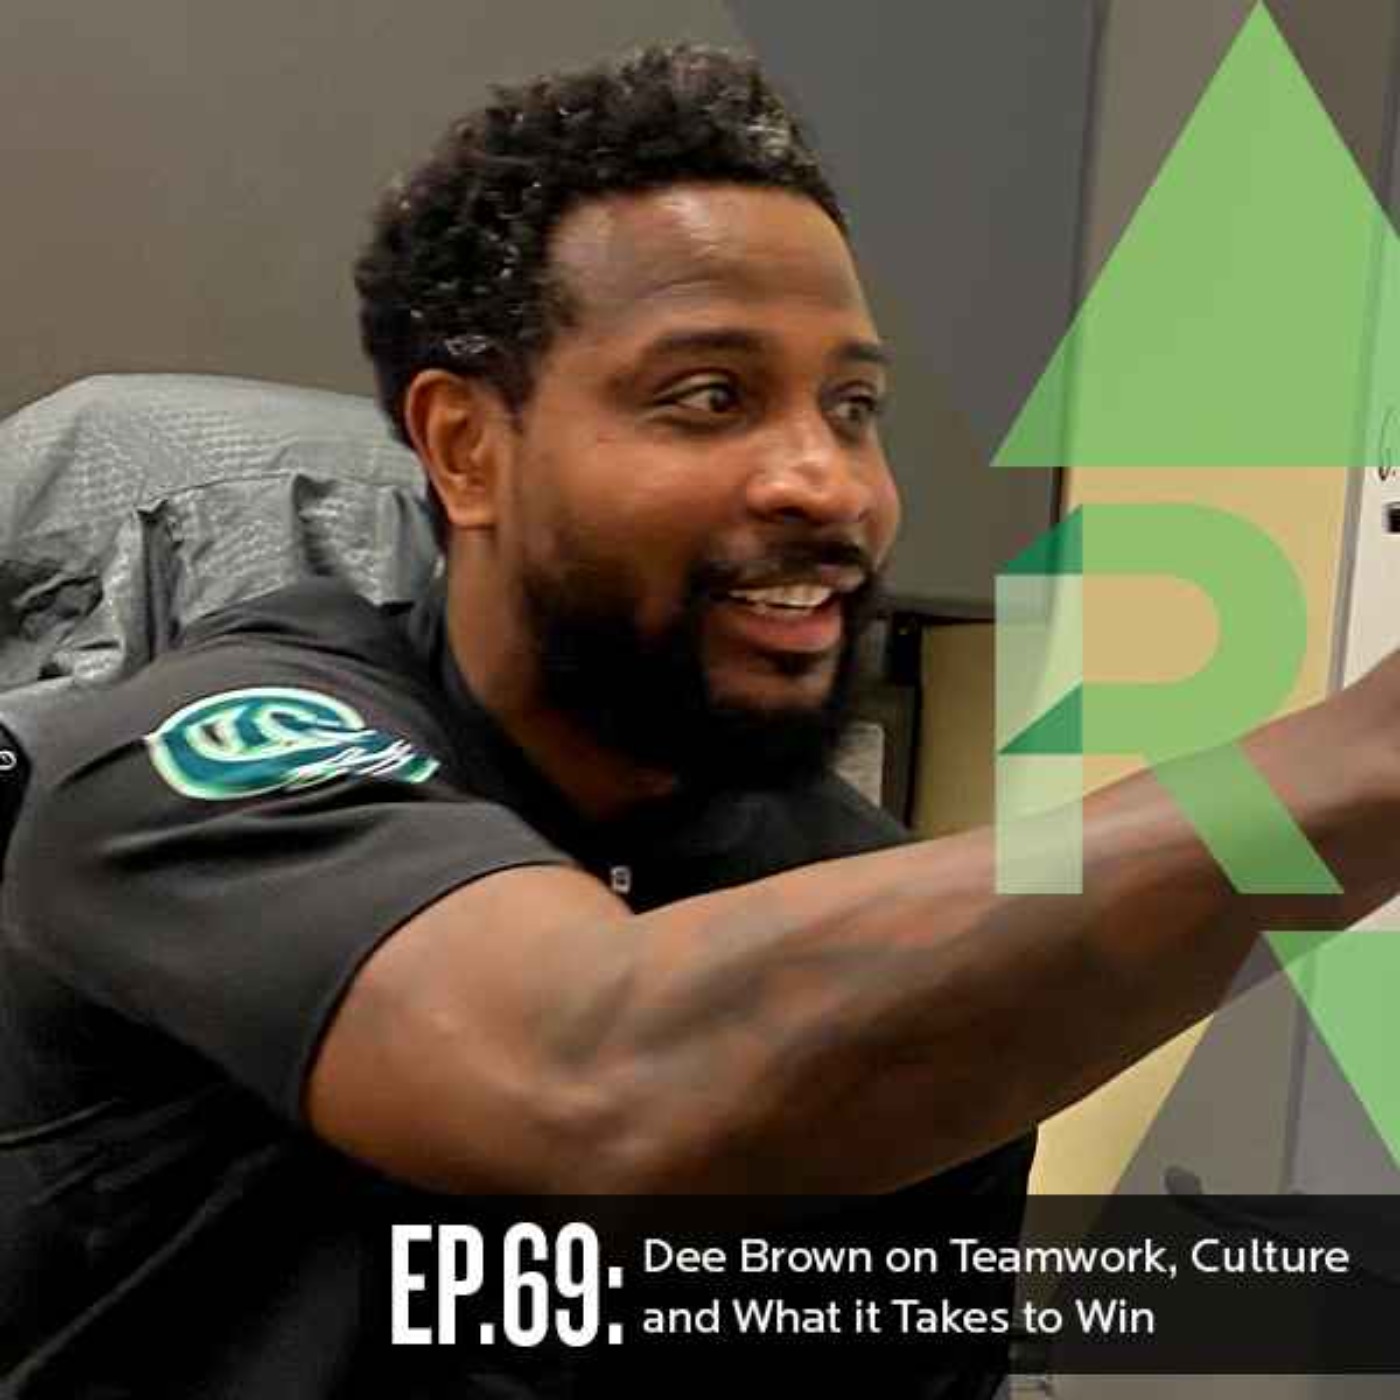 Ep 69: Dee Brown on Teamwork, Culture and What it Takes to Win